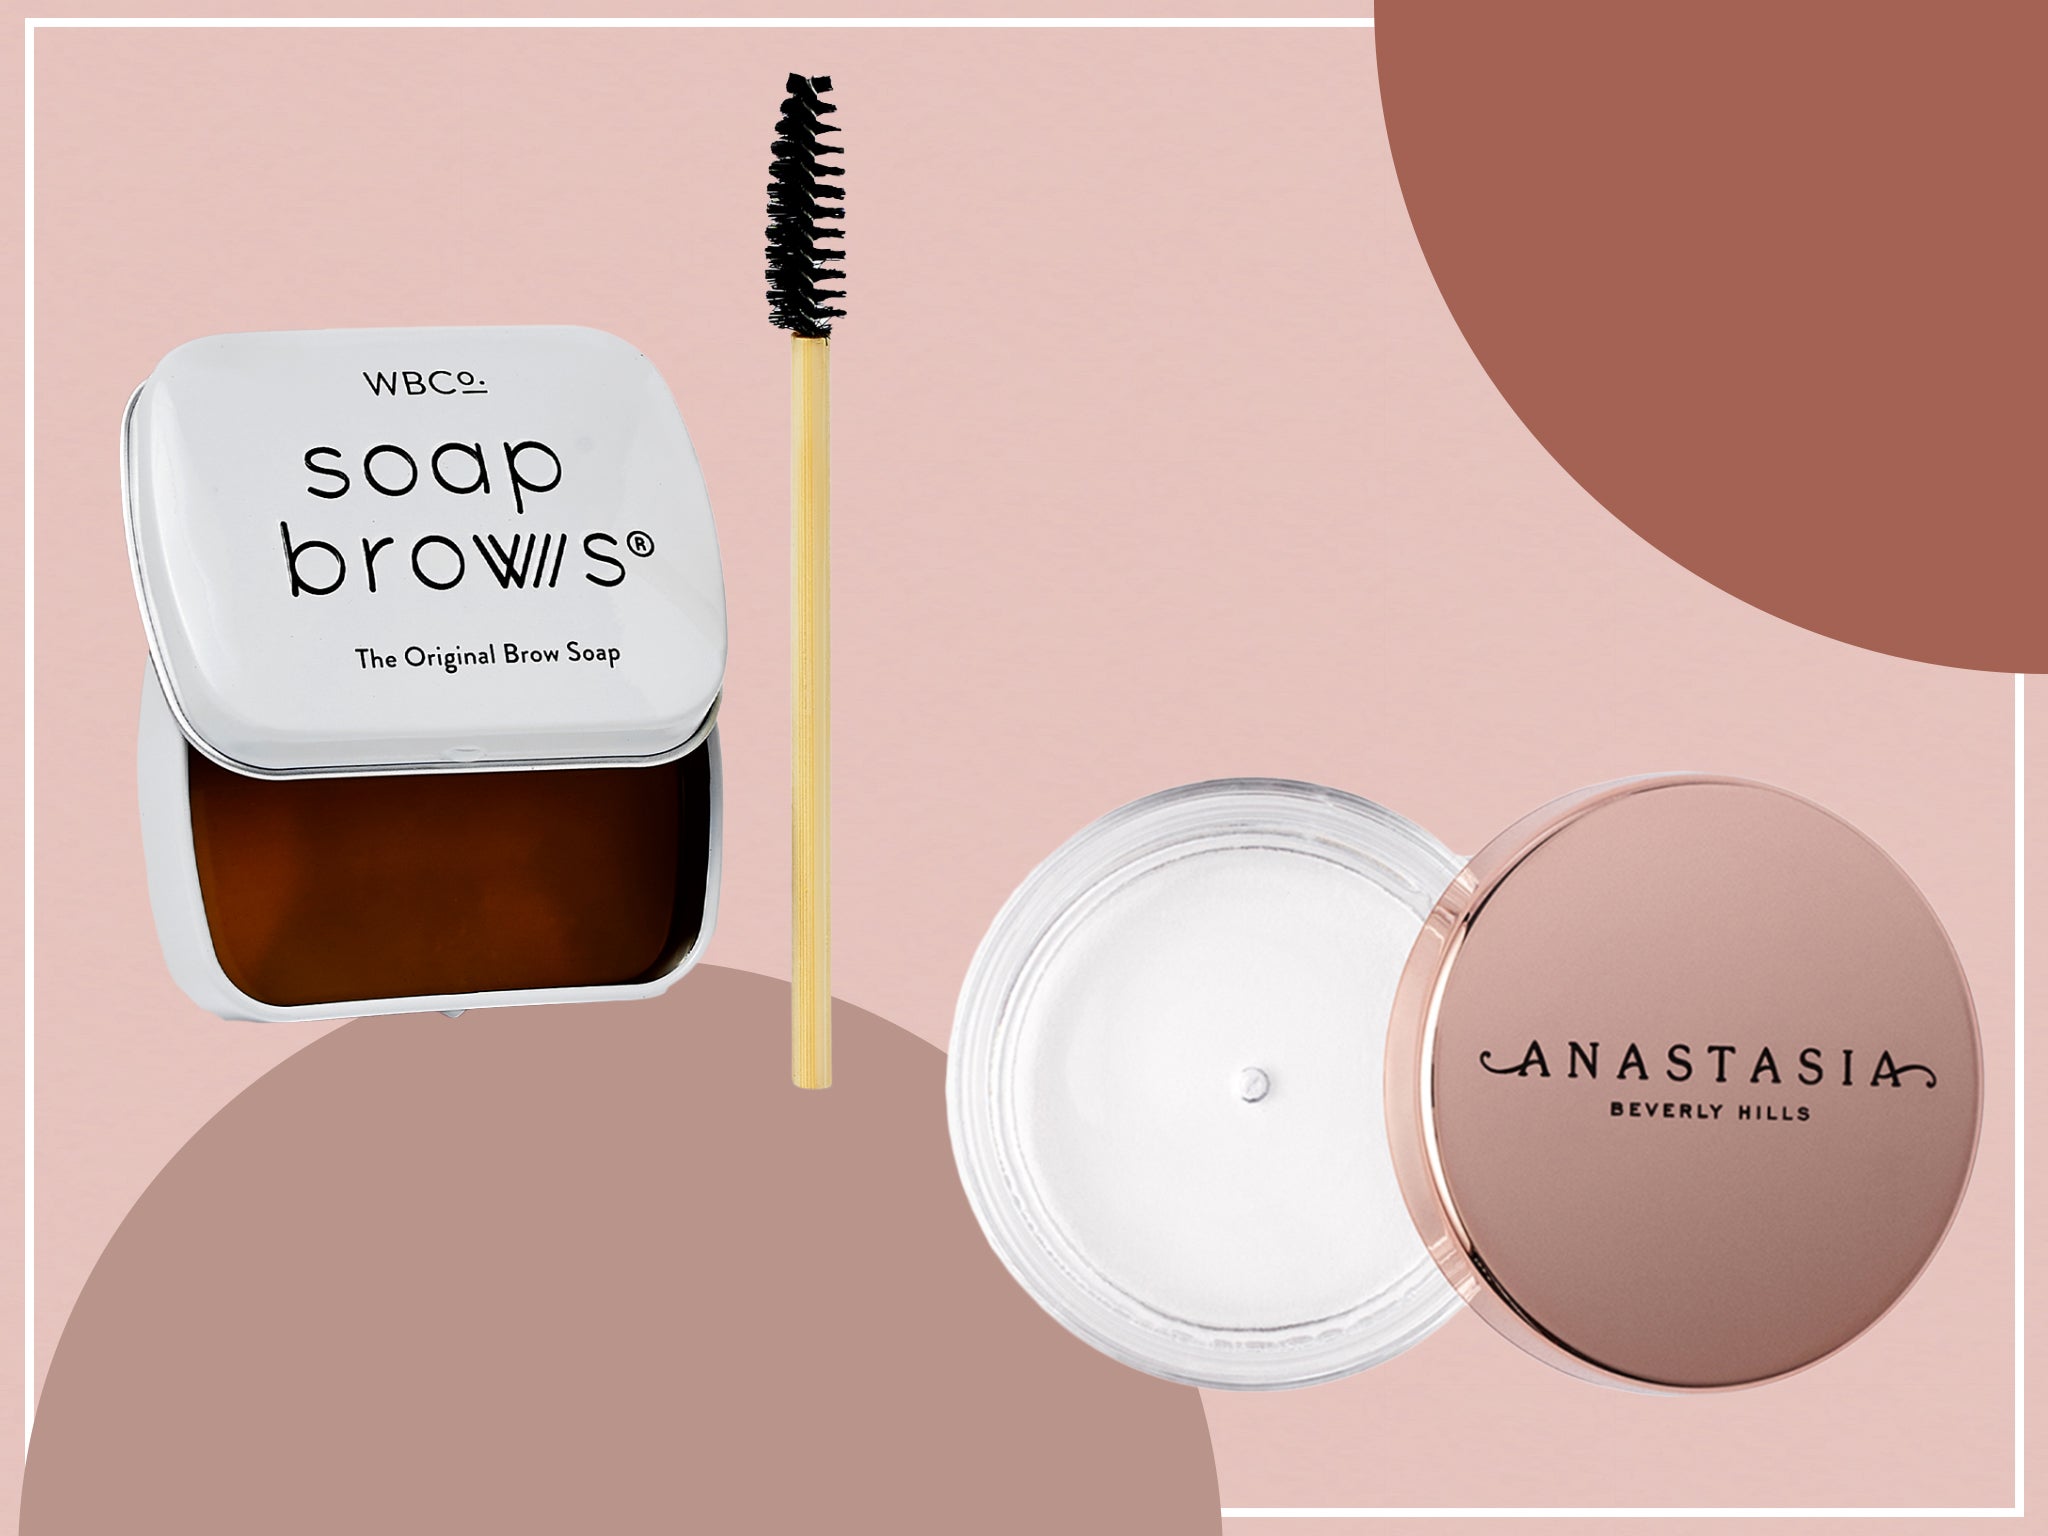 Both brands claim their waxes deliver big, fluffed-up brows